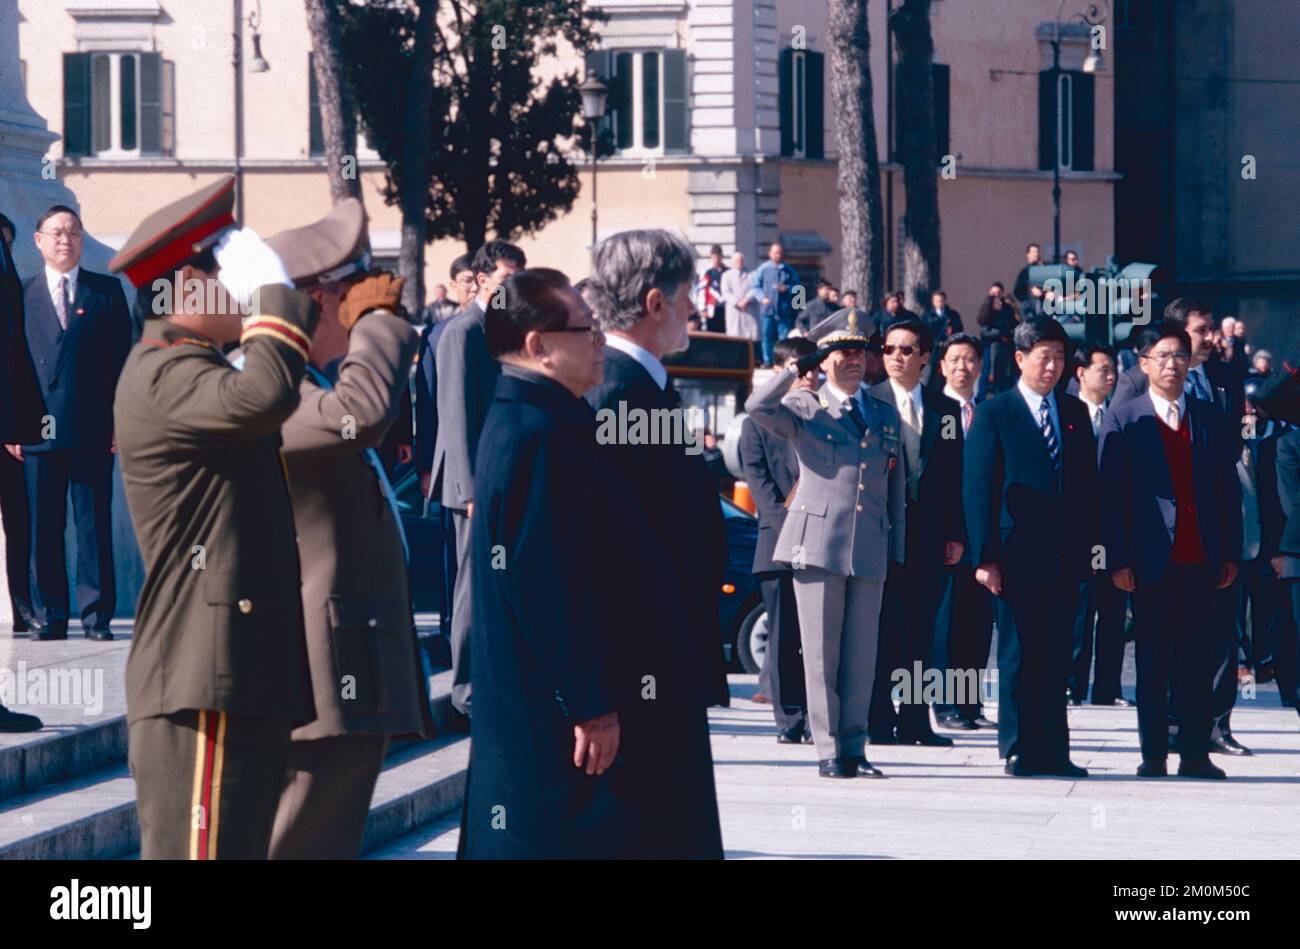 President of the People's Republic of China Jiang Zemin during his official visit, Rome, Italy 1999 Stock Photo